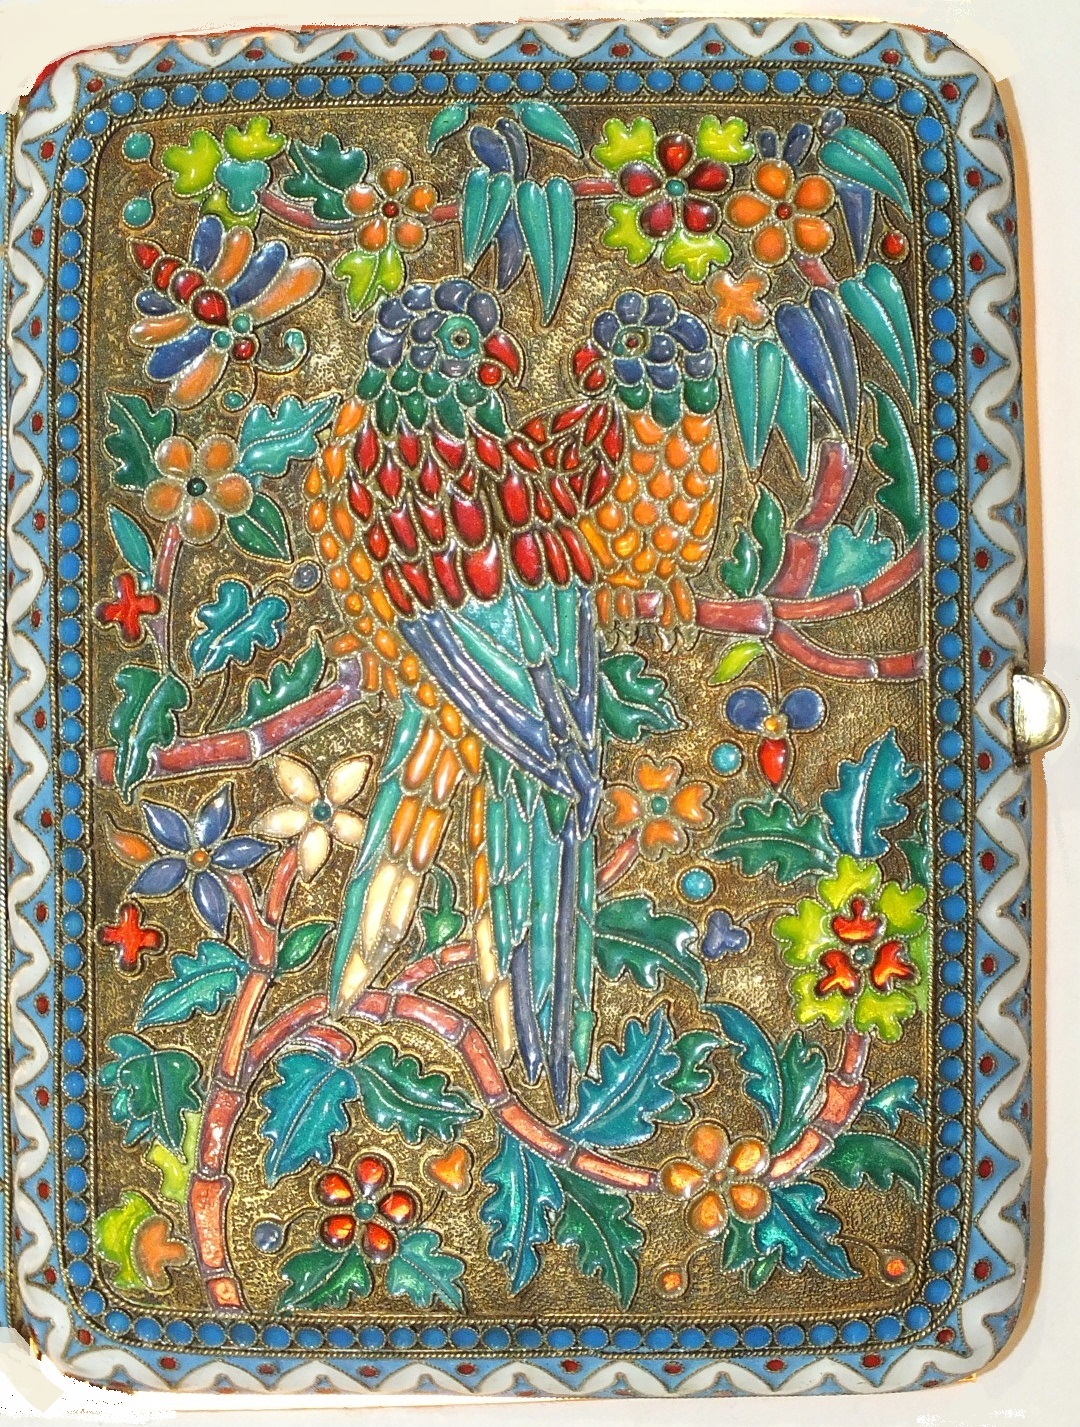 A Russian silver gilt and plique-à-jour enamel cigarette case, each hinged side decorated with a